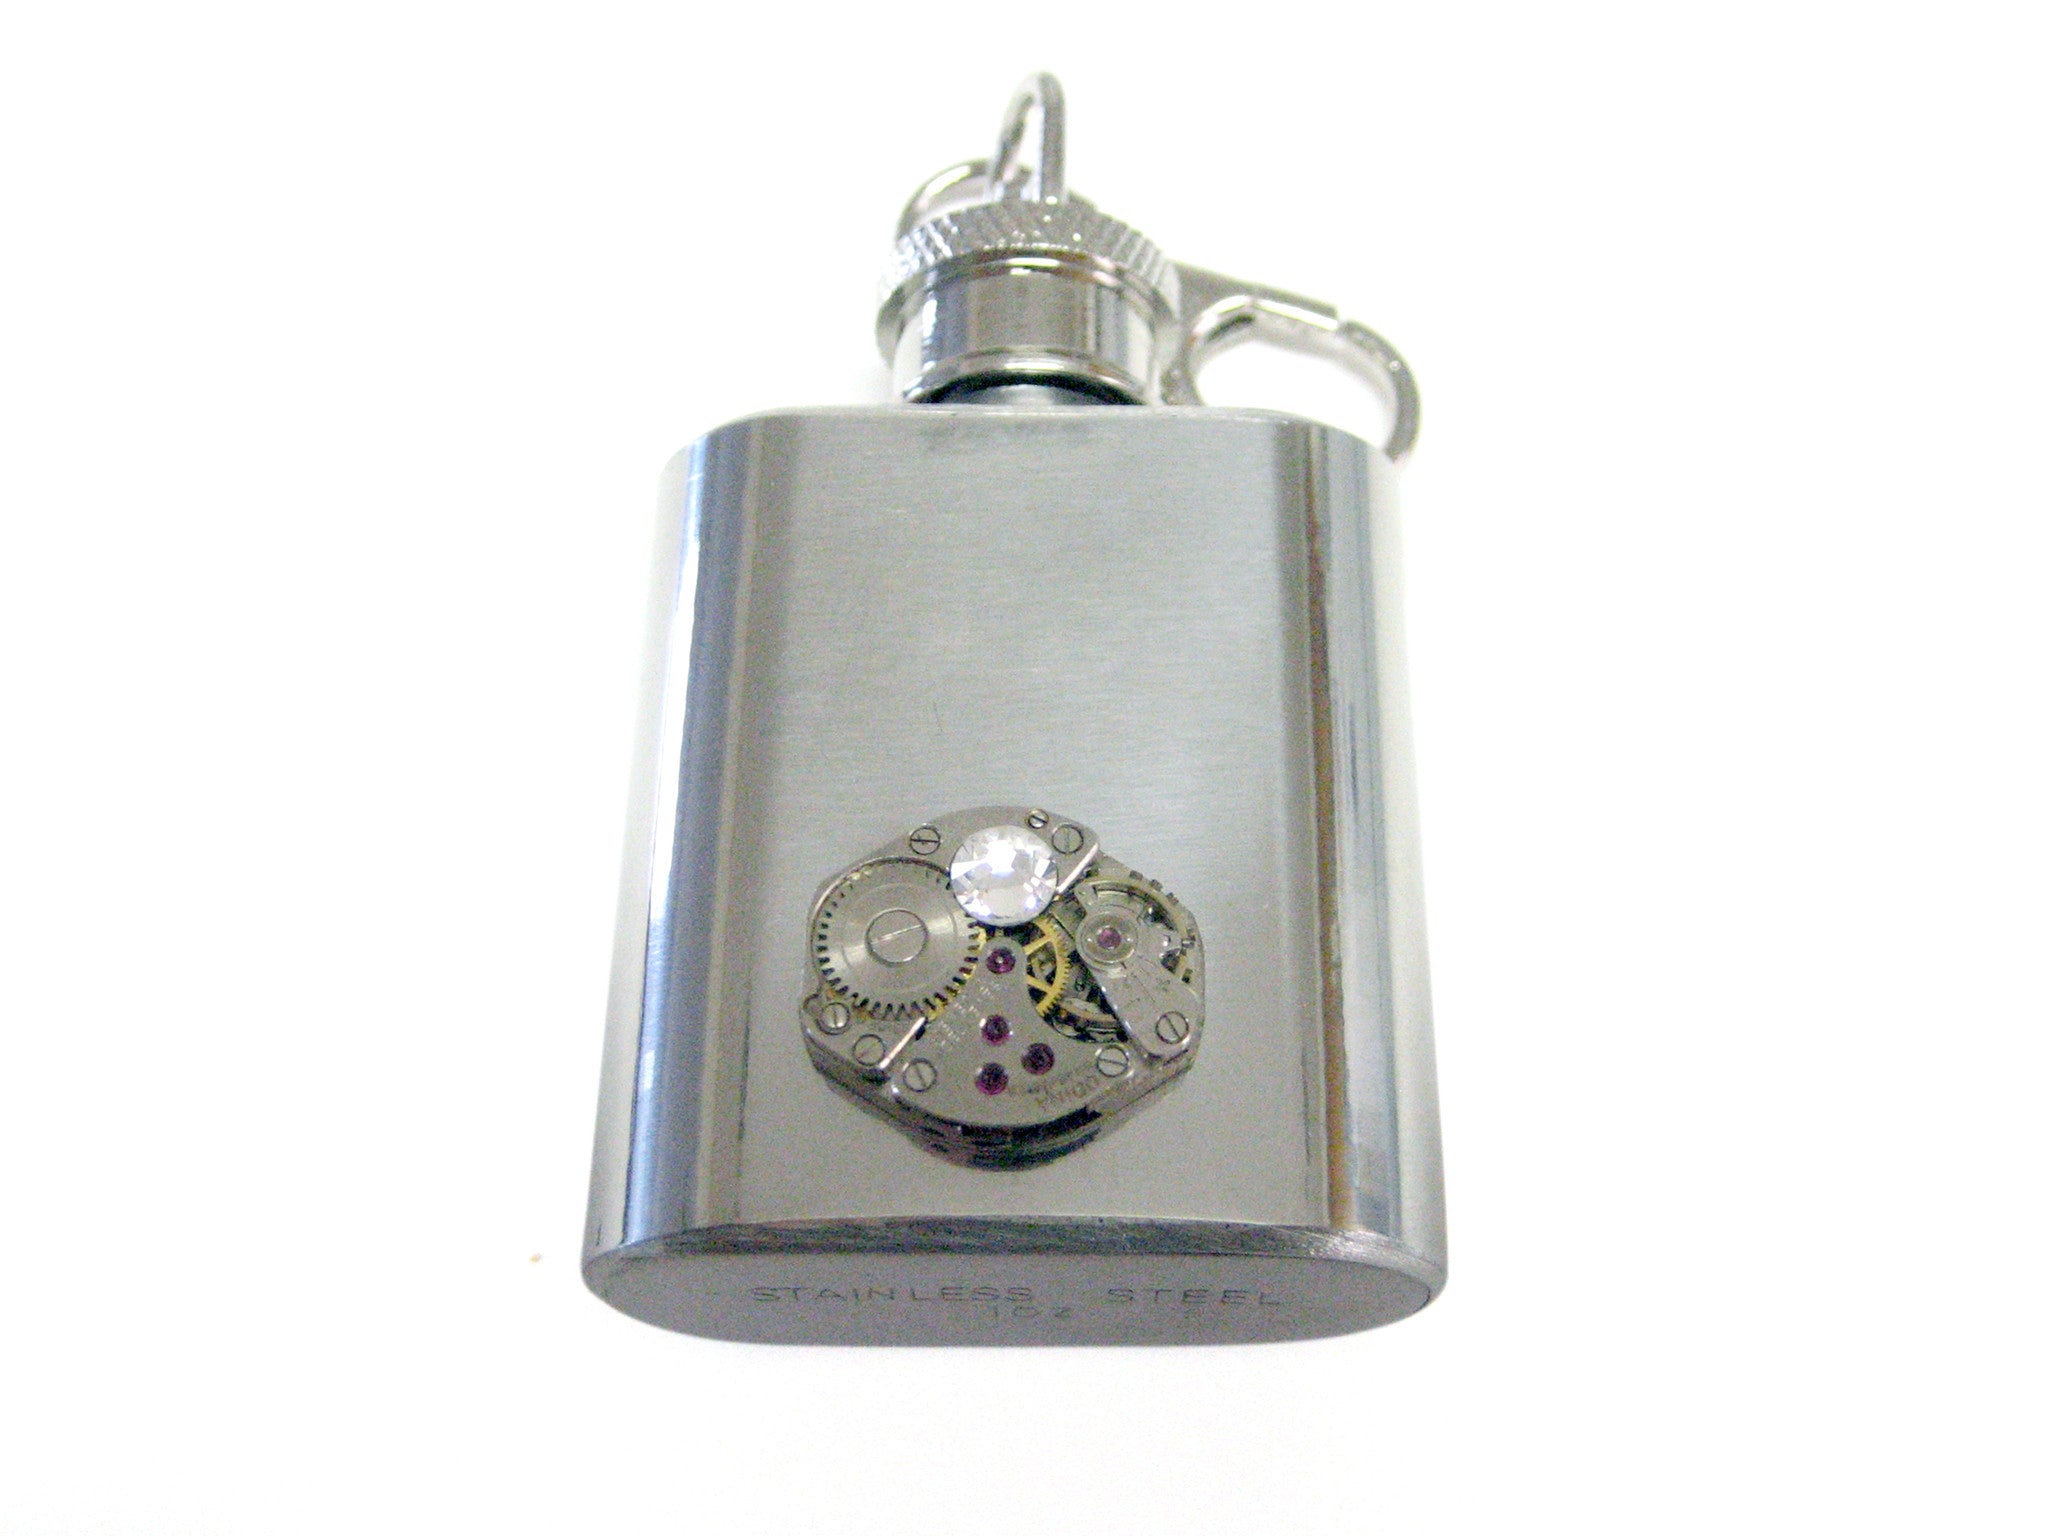 1 Oz. Stainless Steel Key Chain Flask with Steampunk Watch Gear Pendant and Clear Swarovski Crystal